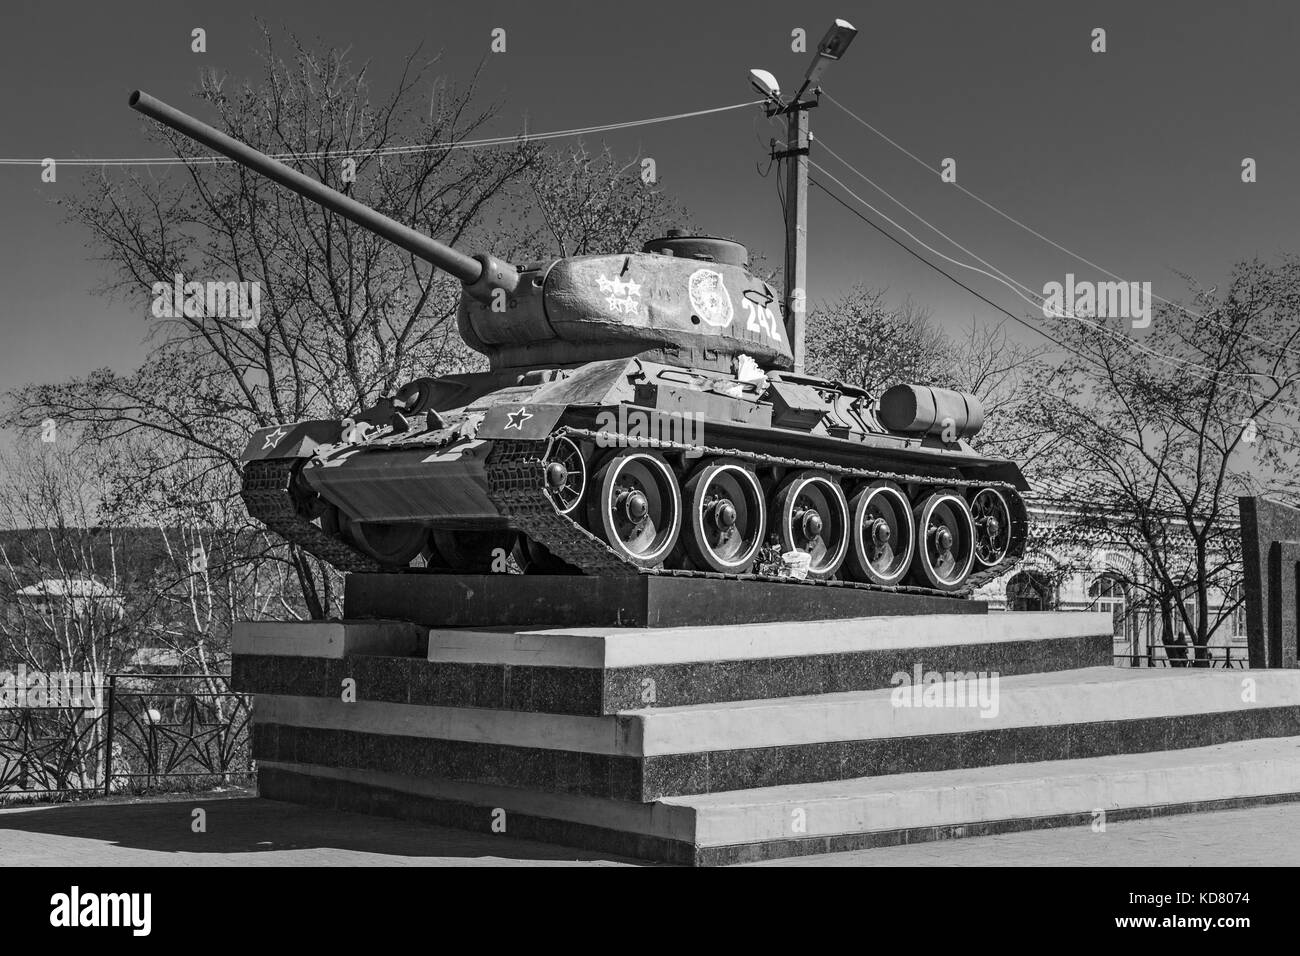 Kungur, Perm, Russia - Soviet T-34 tank from the Second World War era on display on a plinth in Victory Square (Ploshchad Pobedy), in black and white Stock Photo